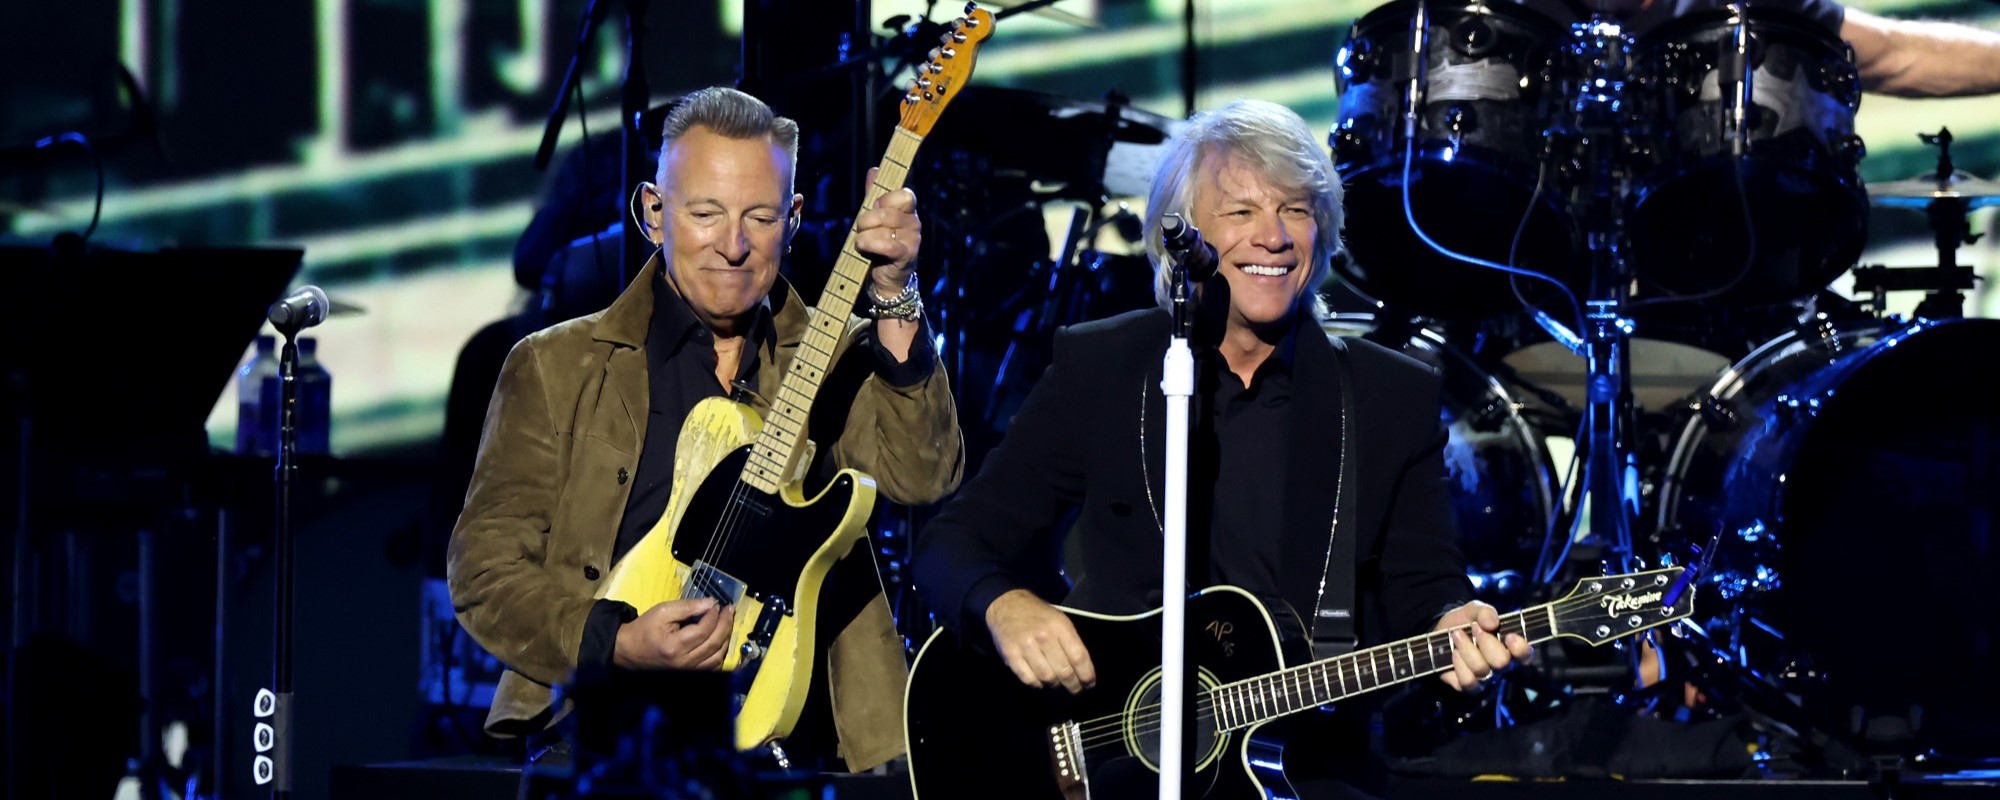 Jon Bon Jovi Reveals That He and Bruce Springsteen Take Long Drives Together and Just Talk